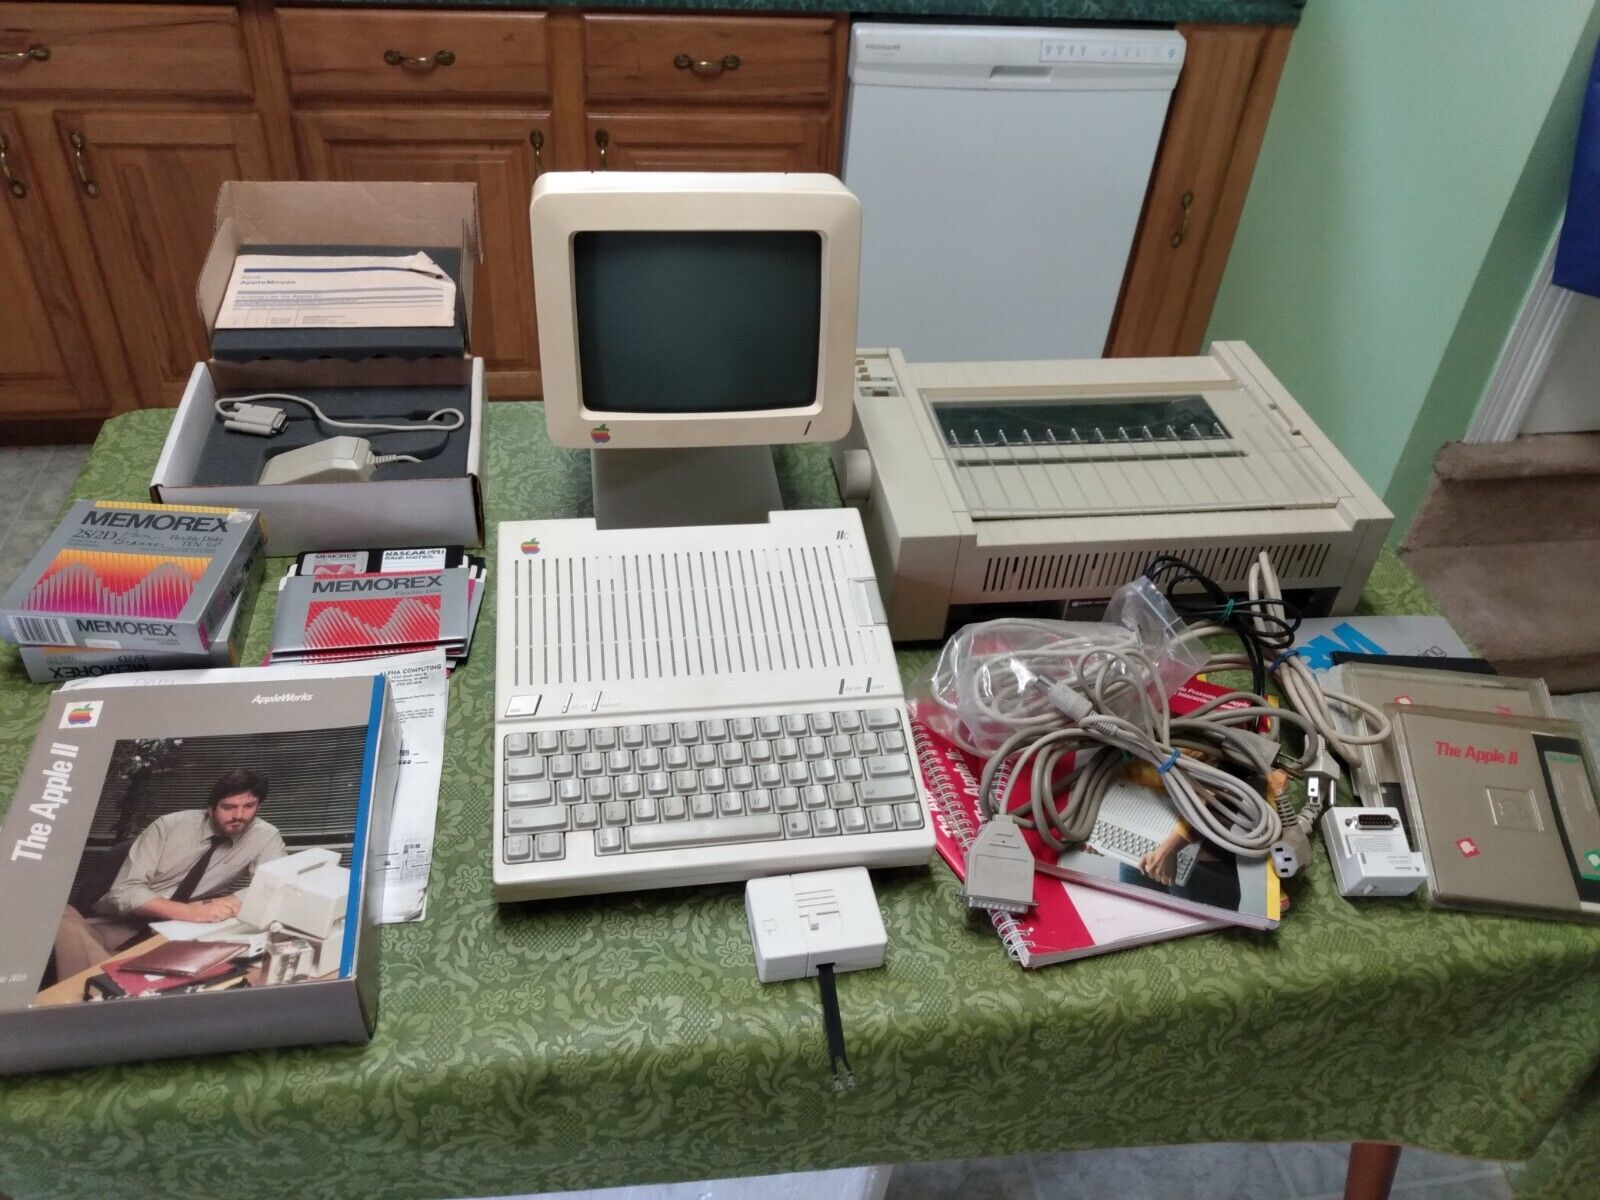 VTG Apple IIc A2S4000 Computer w/ OG Boxes, Monitor, Printer, and cables,etc